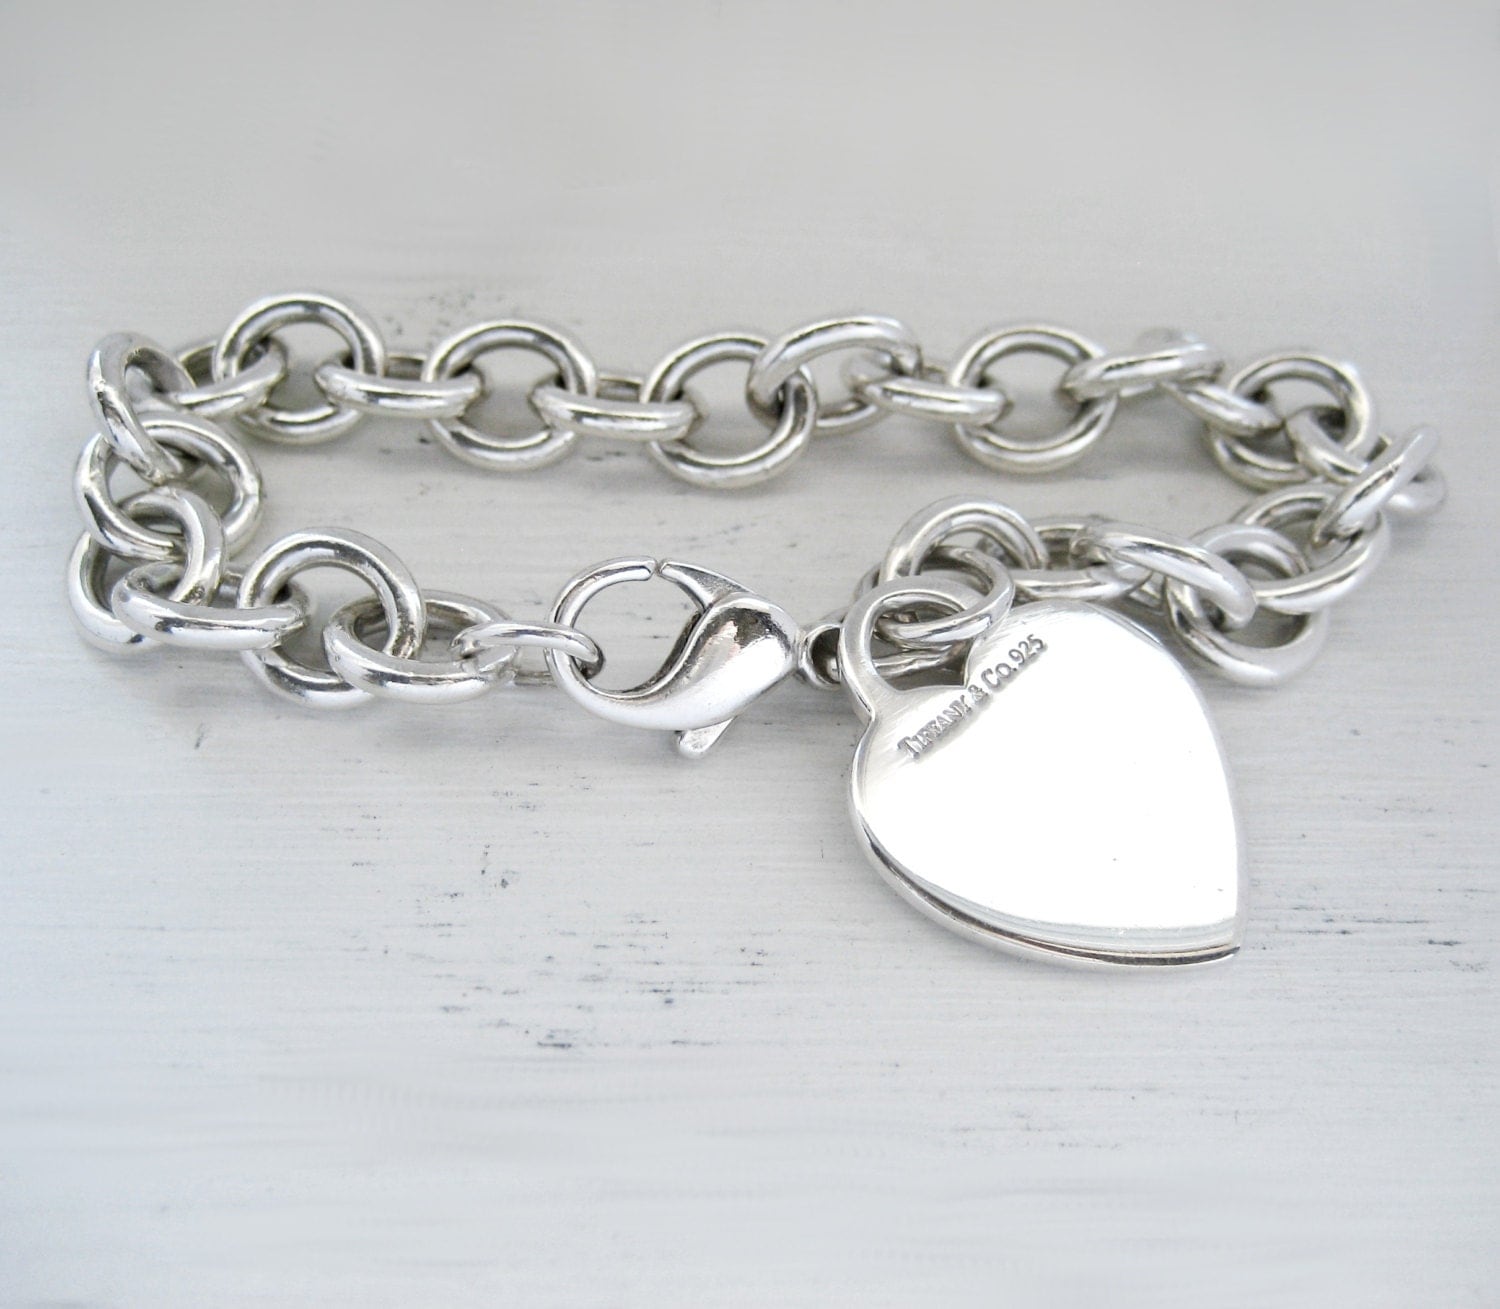 Tiffany And Co Heart Charm Bracelet 925 Sterling Silver By Baffy21